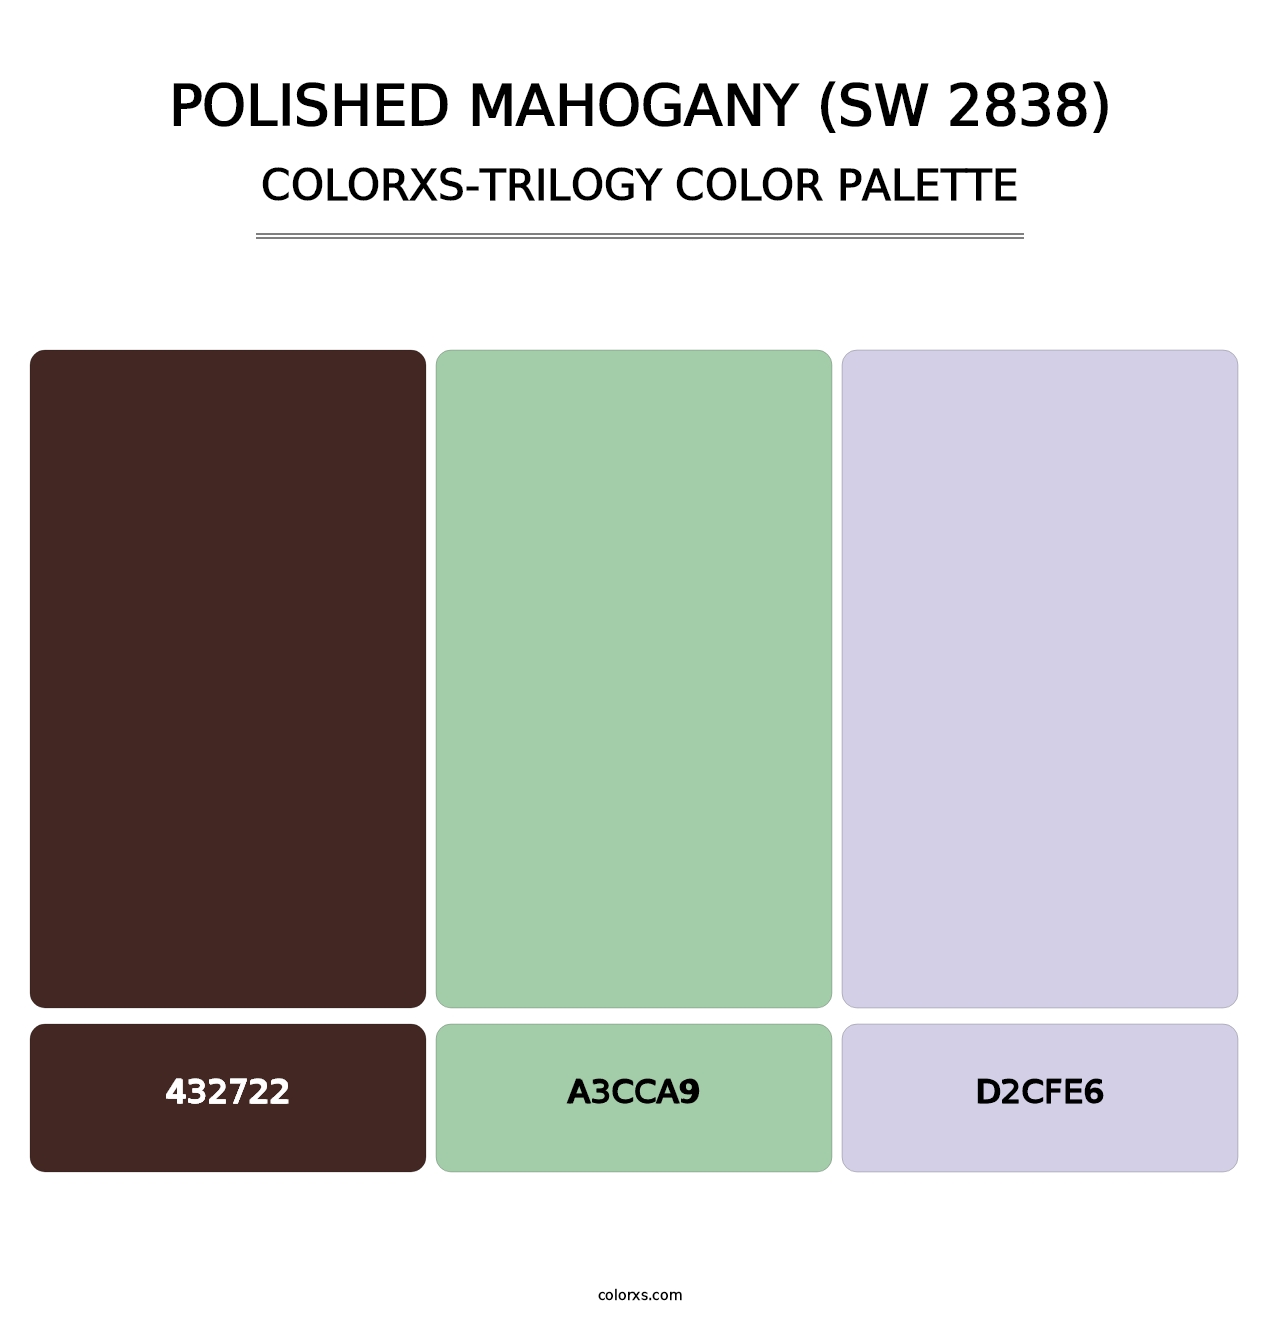 Polished Mahogany (SW 2838) - Colorxs Trilogy Palette